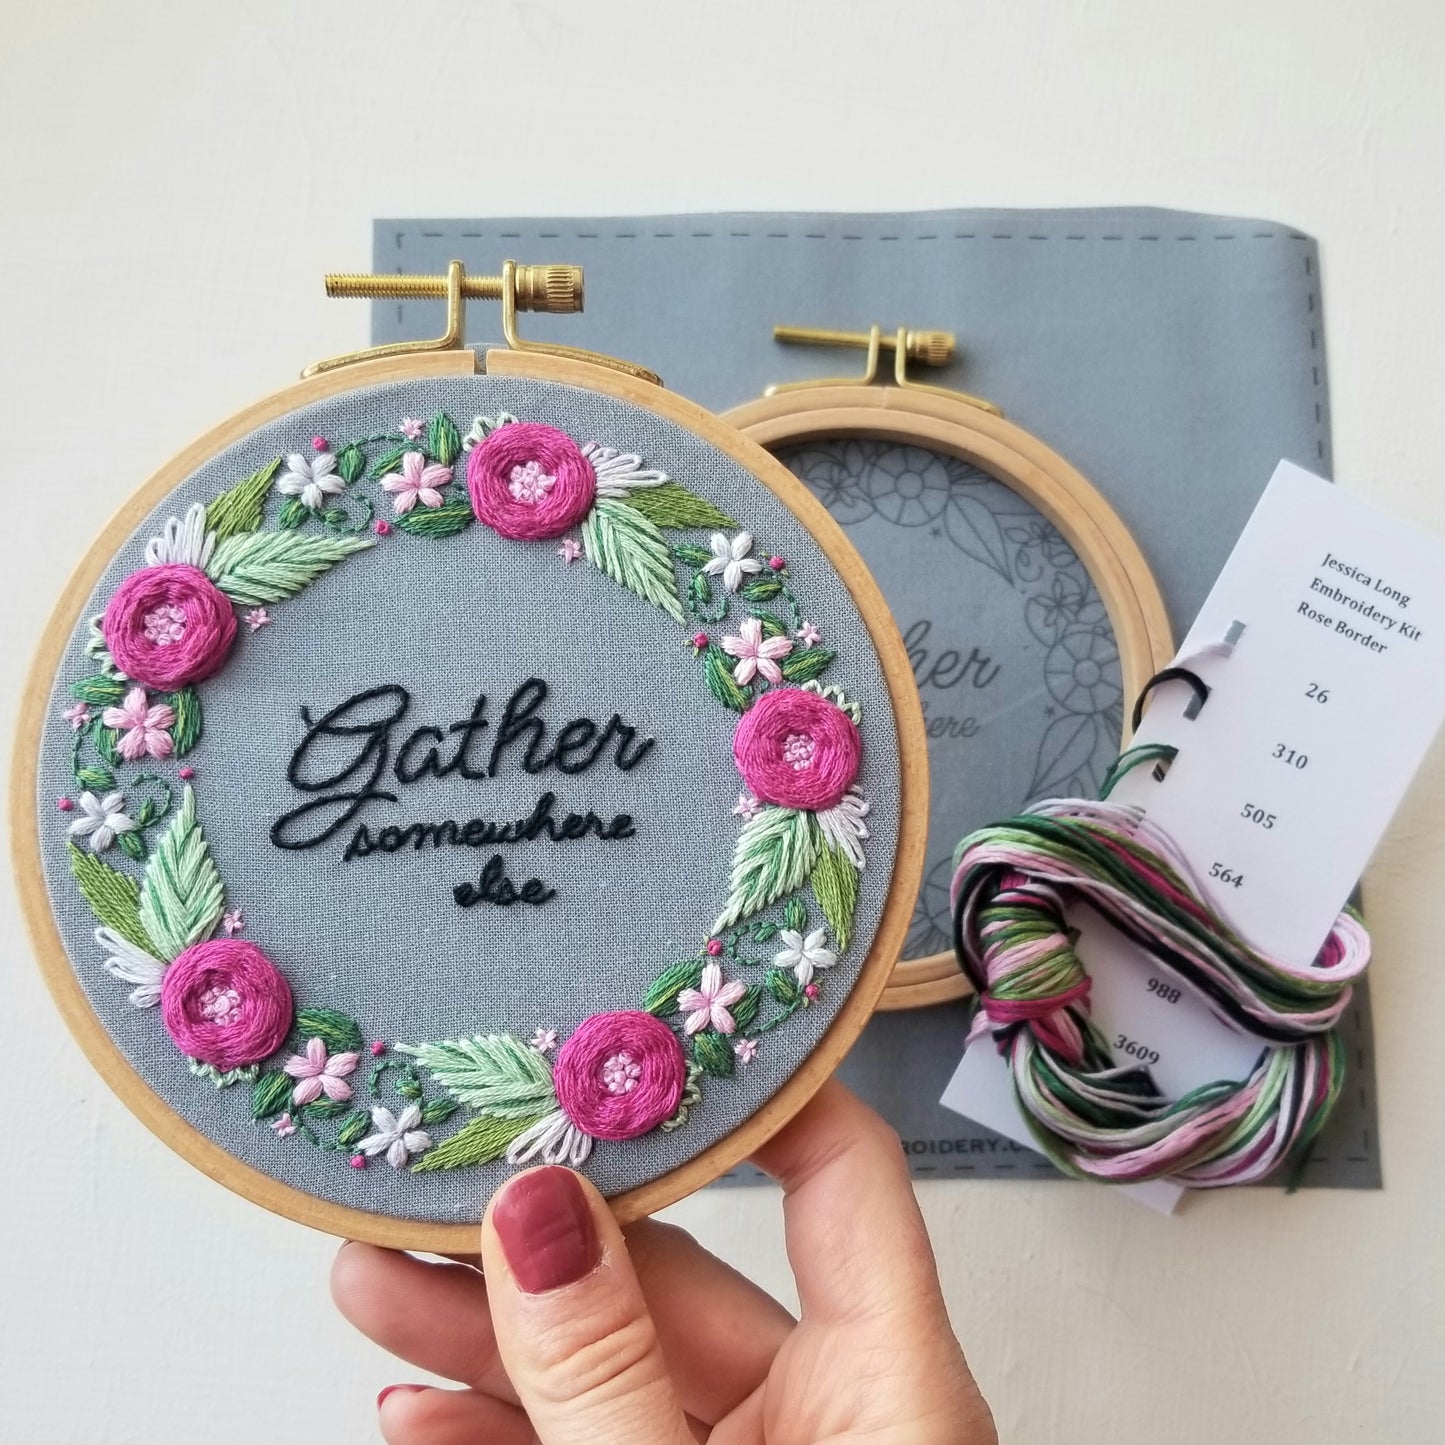 "Gather...somewhere else" Embroidery Kit